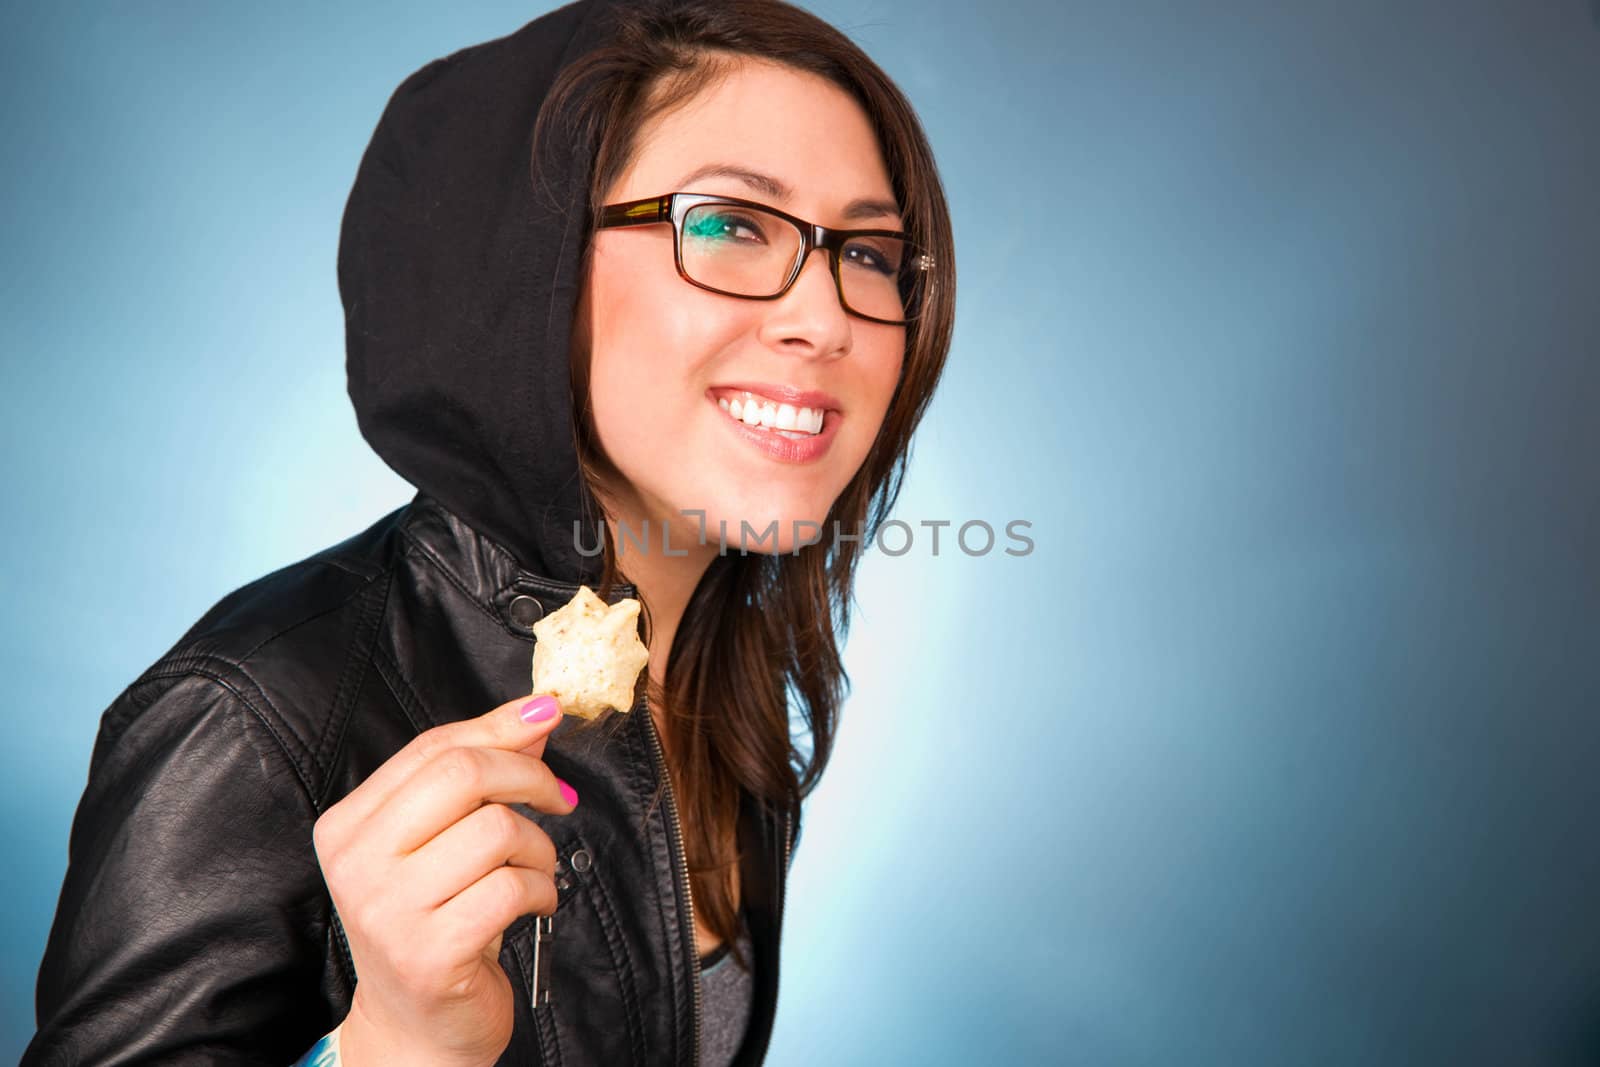 Blue background in a horizontal composition of a young woman smiling while chewing a bite of chips